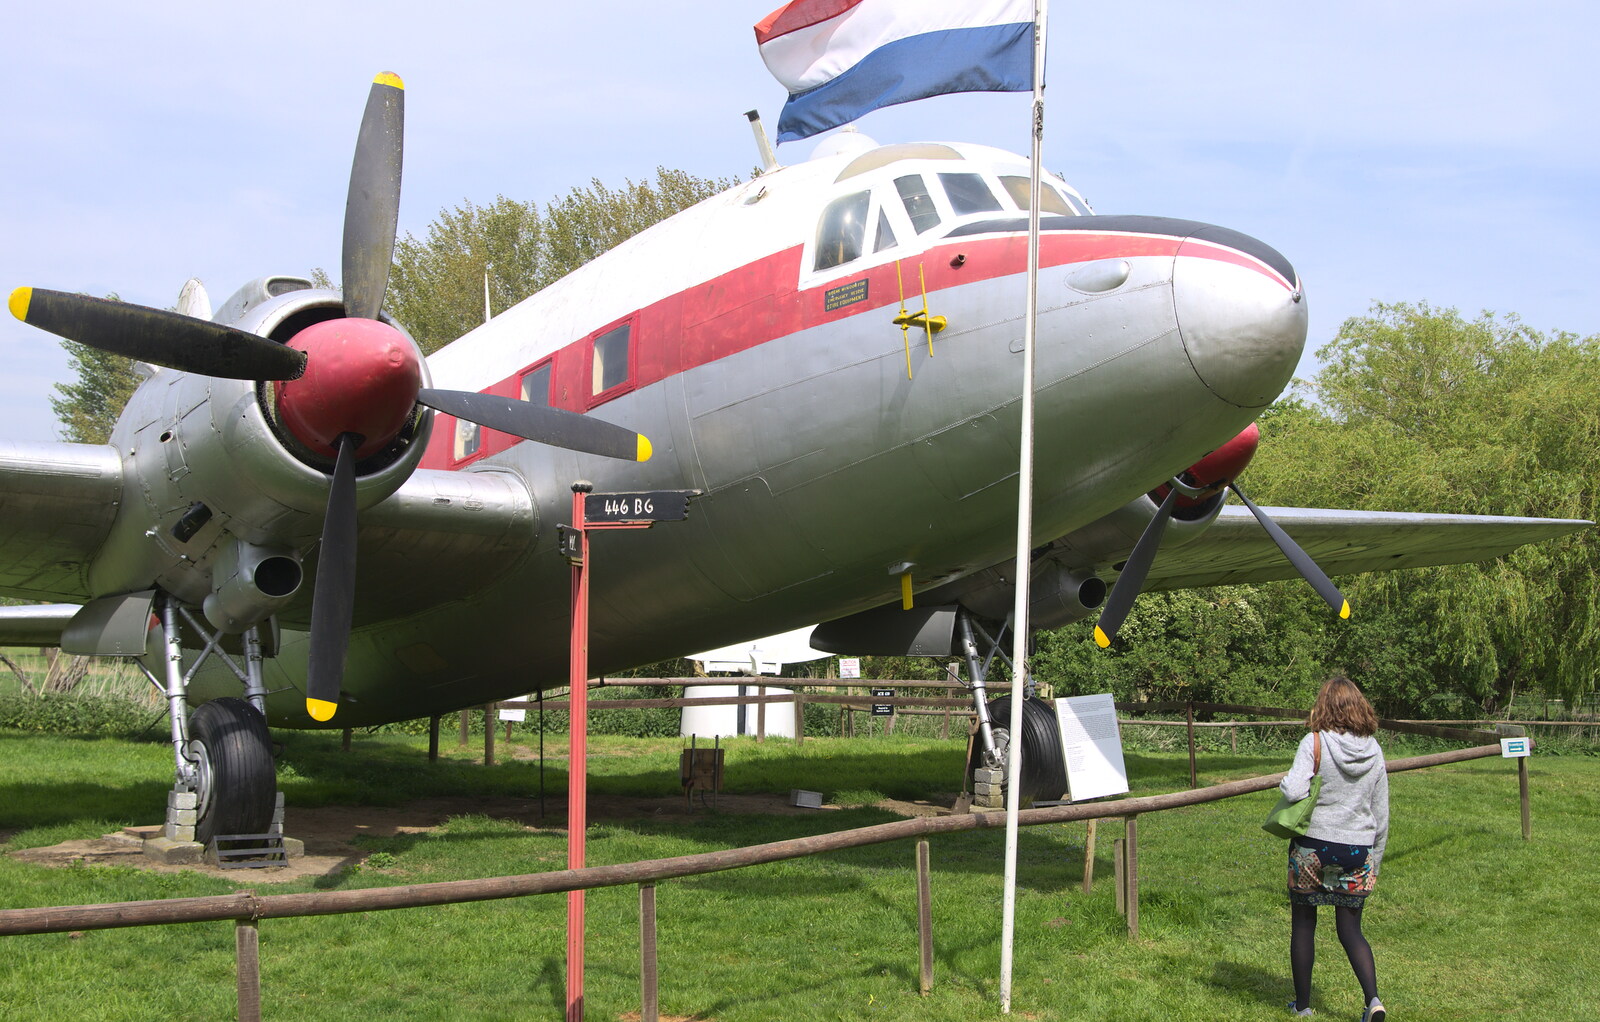 Isobel looks at a plane from Norfolk and Suffolk Aviation Museum, Flixton, Suffolk - 30th April 2017